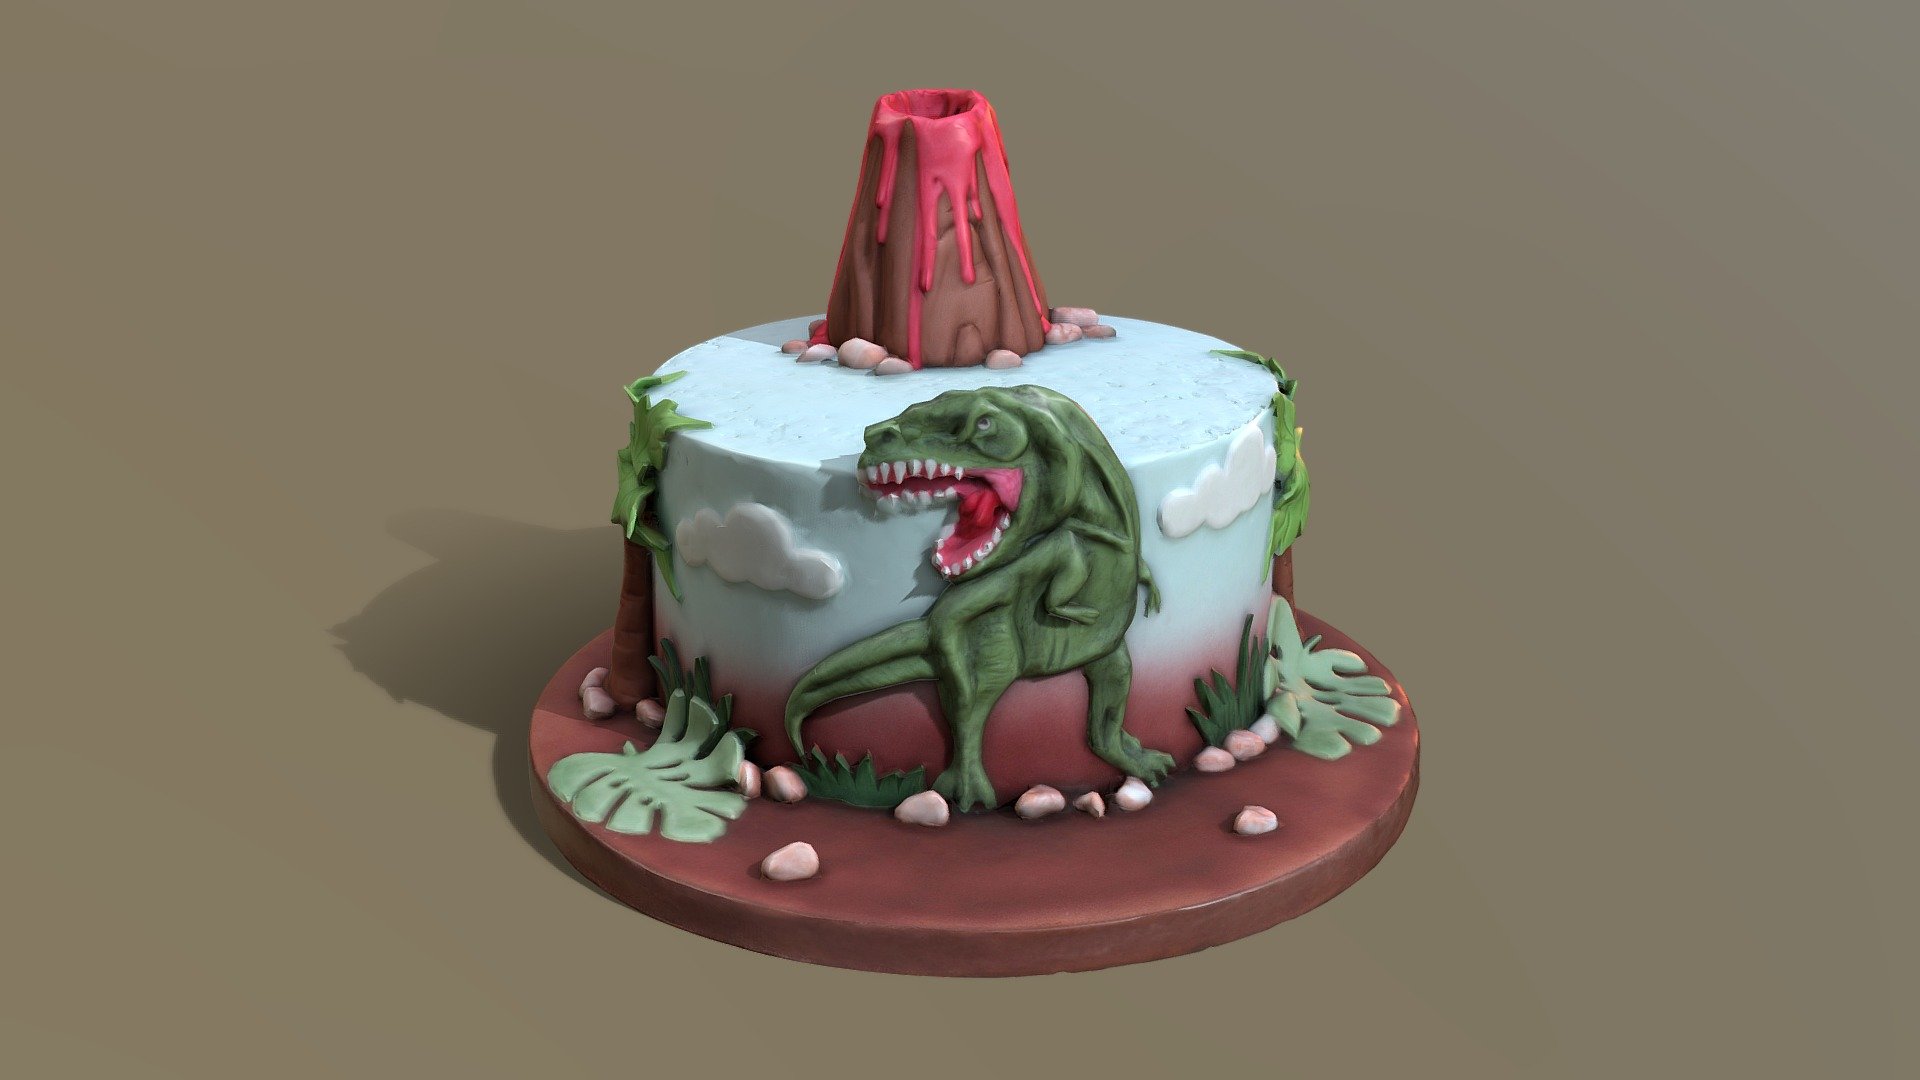 This T-Rex Dinosaur Volcano Cake model was created using photogrammetry which is made by CAKESBURG Premium Cake Shop in the UK. You can purchase real cake from this link: https://cakesburg.co.uk/products/t-rex-volcano-cake?_pos=8&amp;_sid=0faea4351&amp;_ss=r

Textures 4096*4096px PBR photoscan-based materials Base Color, Normal Map, Roughness) - T-Rex Dinosaur Volcano Cake - Buy Royalty Free 3D model by Cakesburg Premium 3D Cake Shop (@Viscom_Cakesburg) 3d model